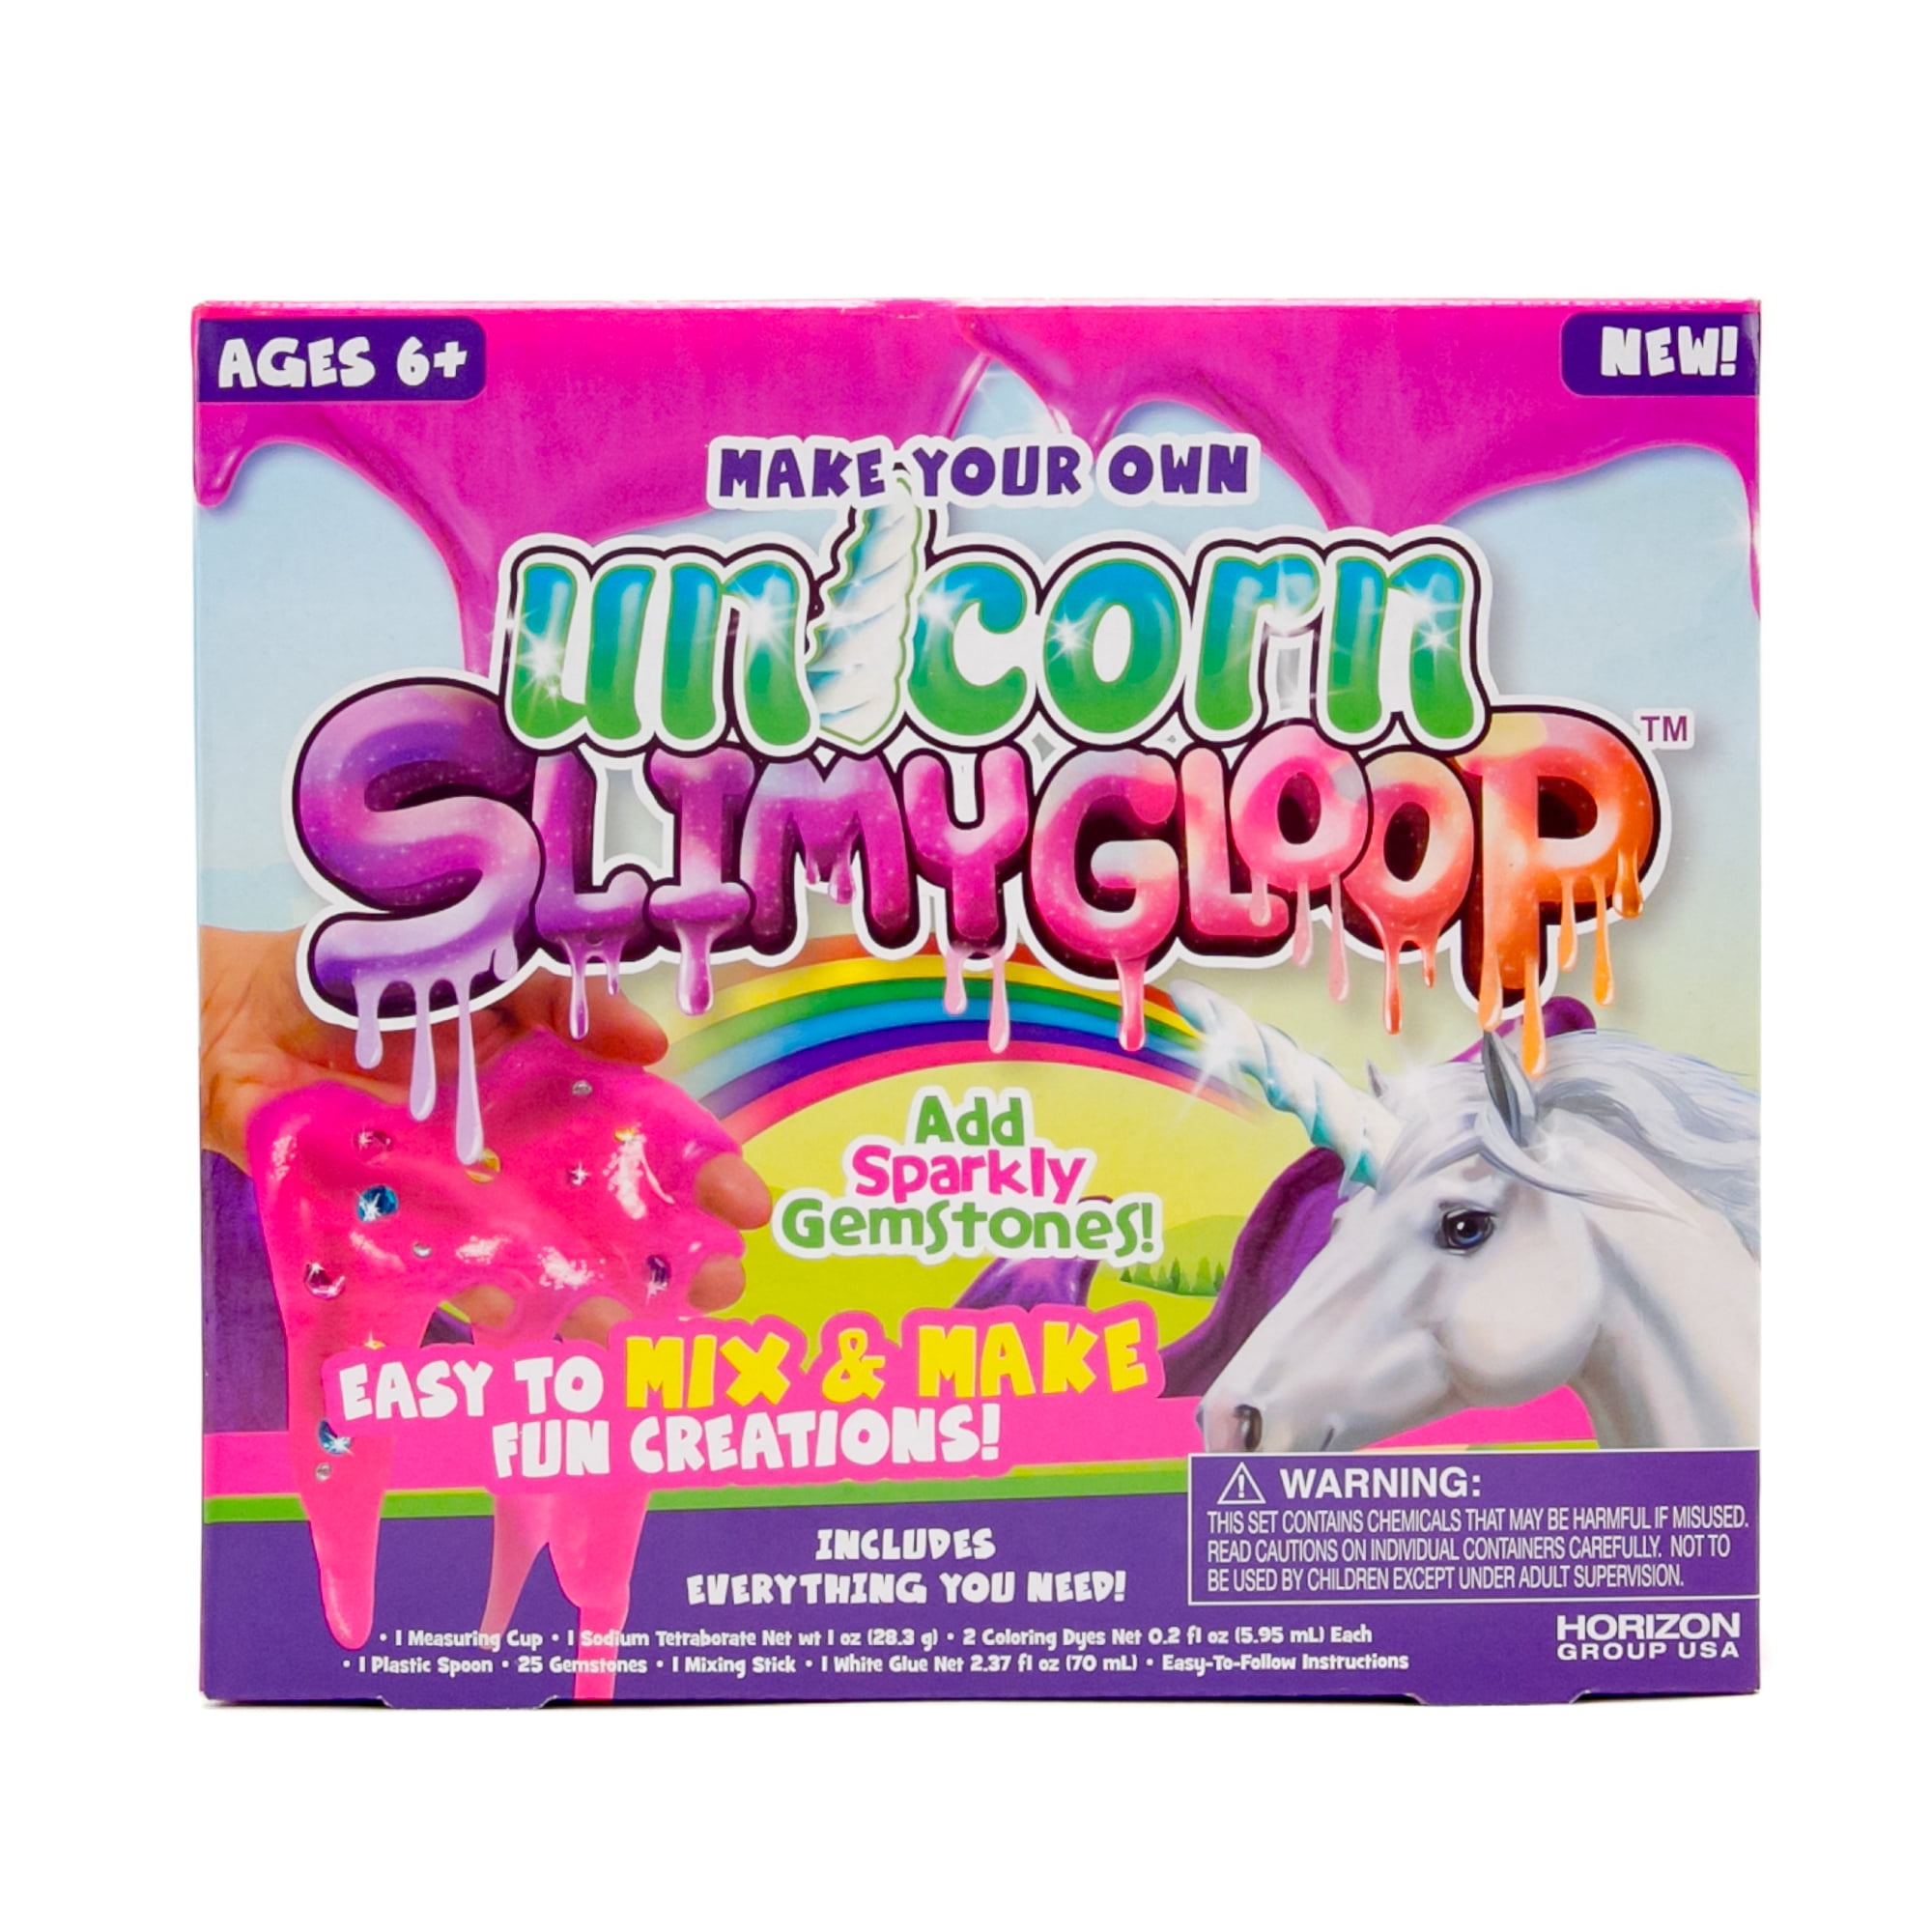 Sensory & Messy Play Certified Biodegradable Toy Turn water into gooey Slime Unicorn Slime Play Pink Includes 2 x Unicorn Figures 